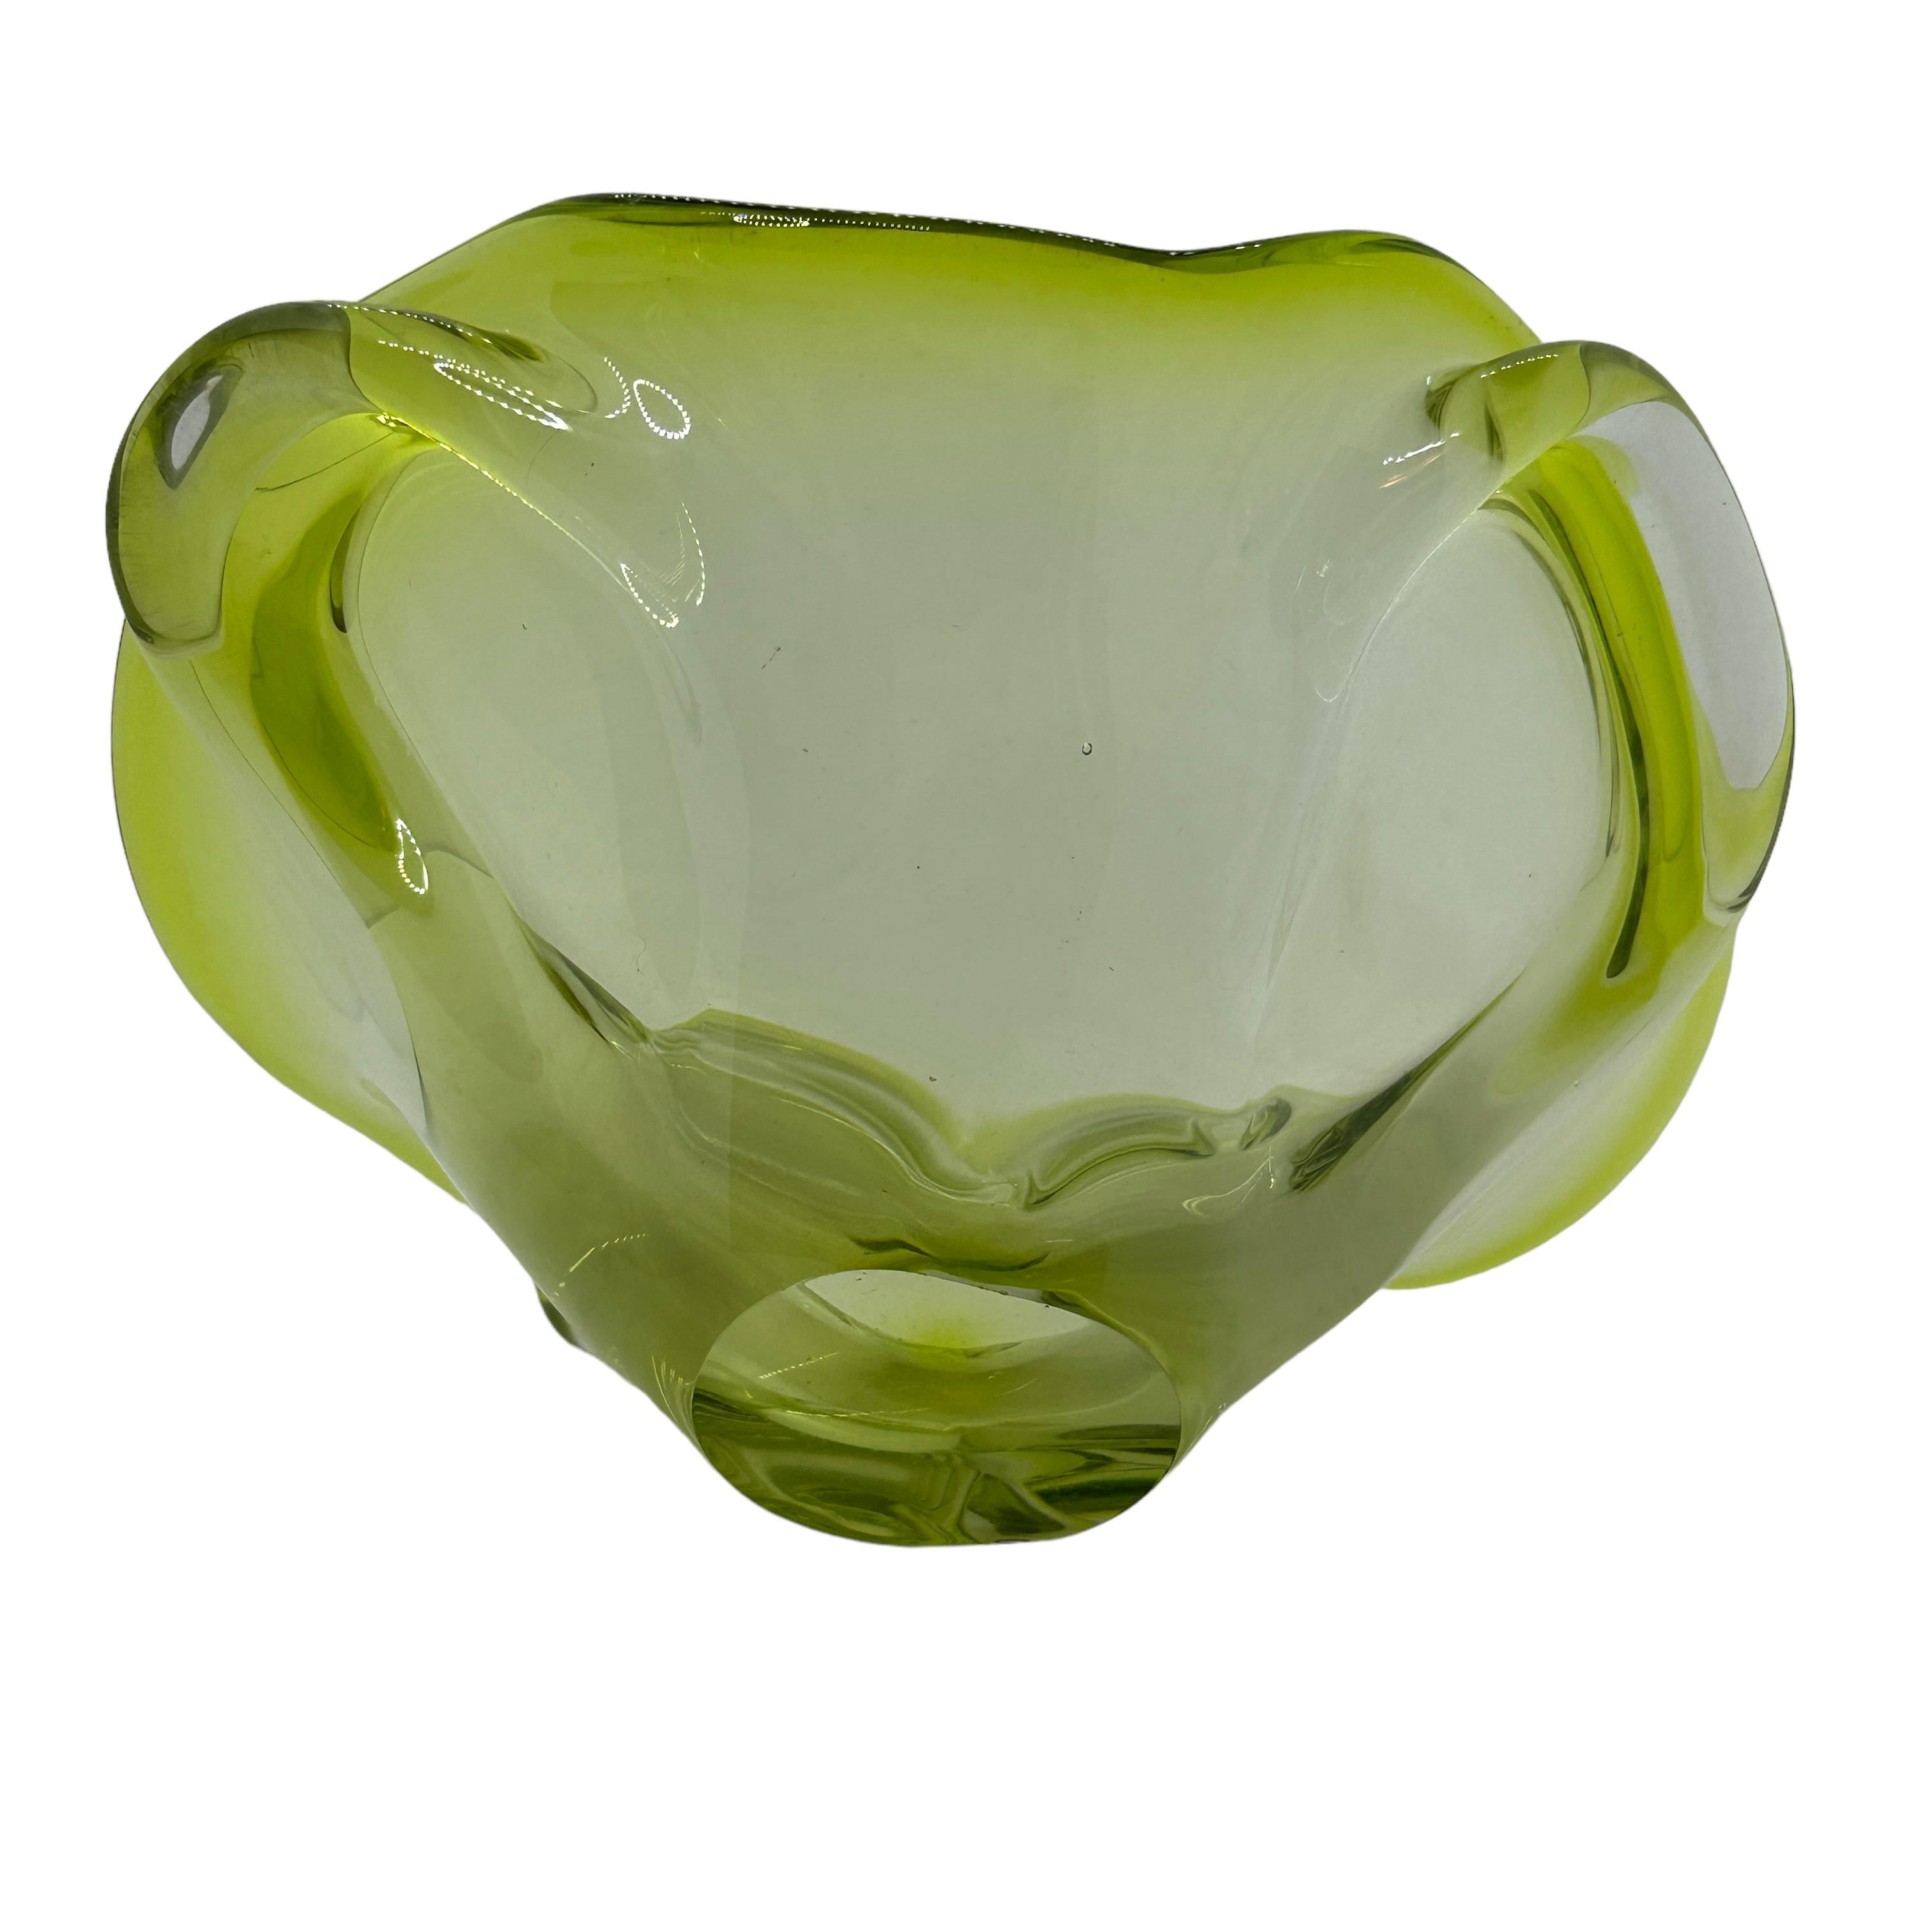 Late 20th Century Beautiful Lime Green and Clear Murano Glass Bowl Catchall Vintage, Italy, 1970s For Sale